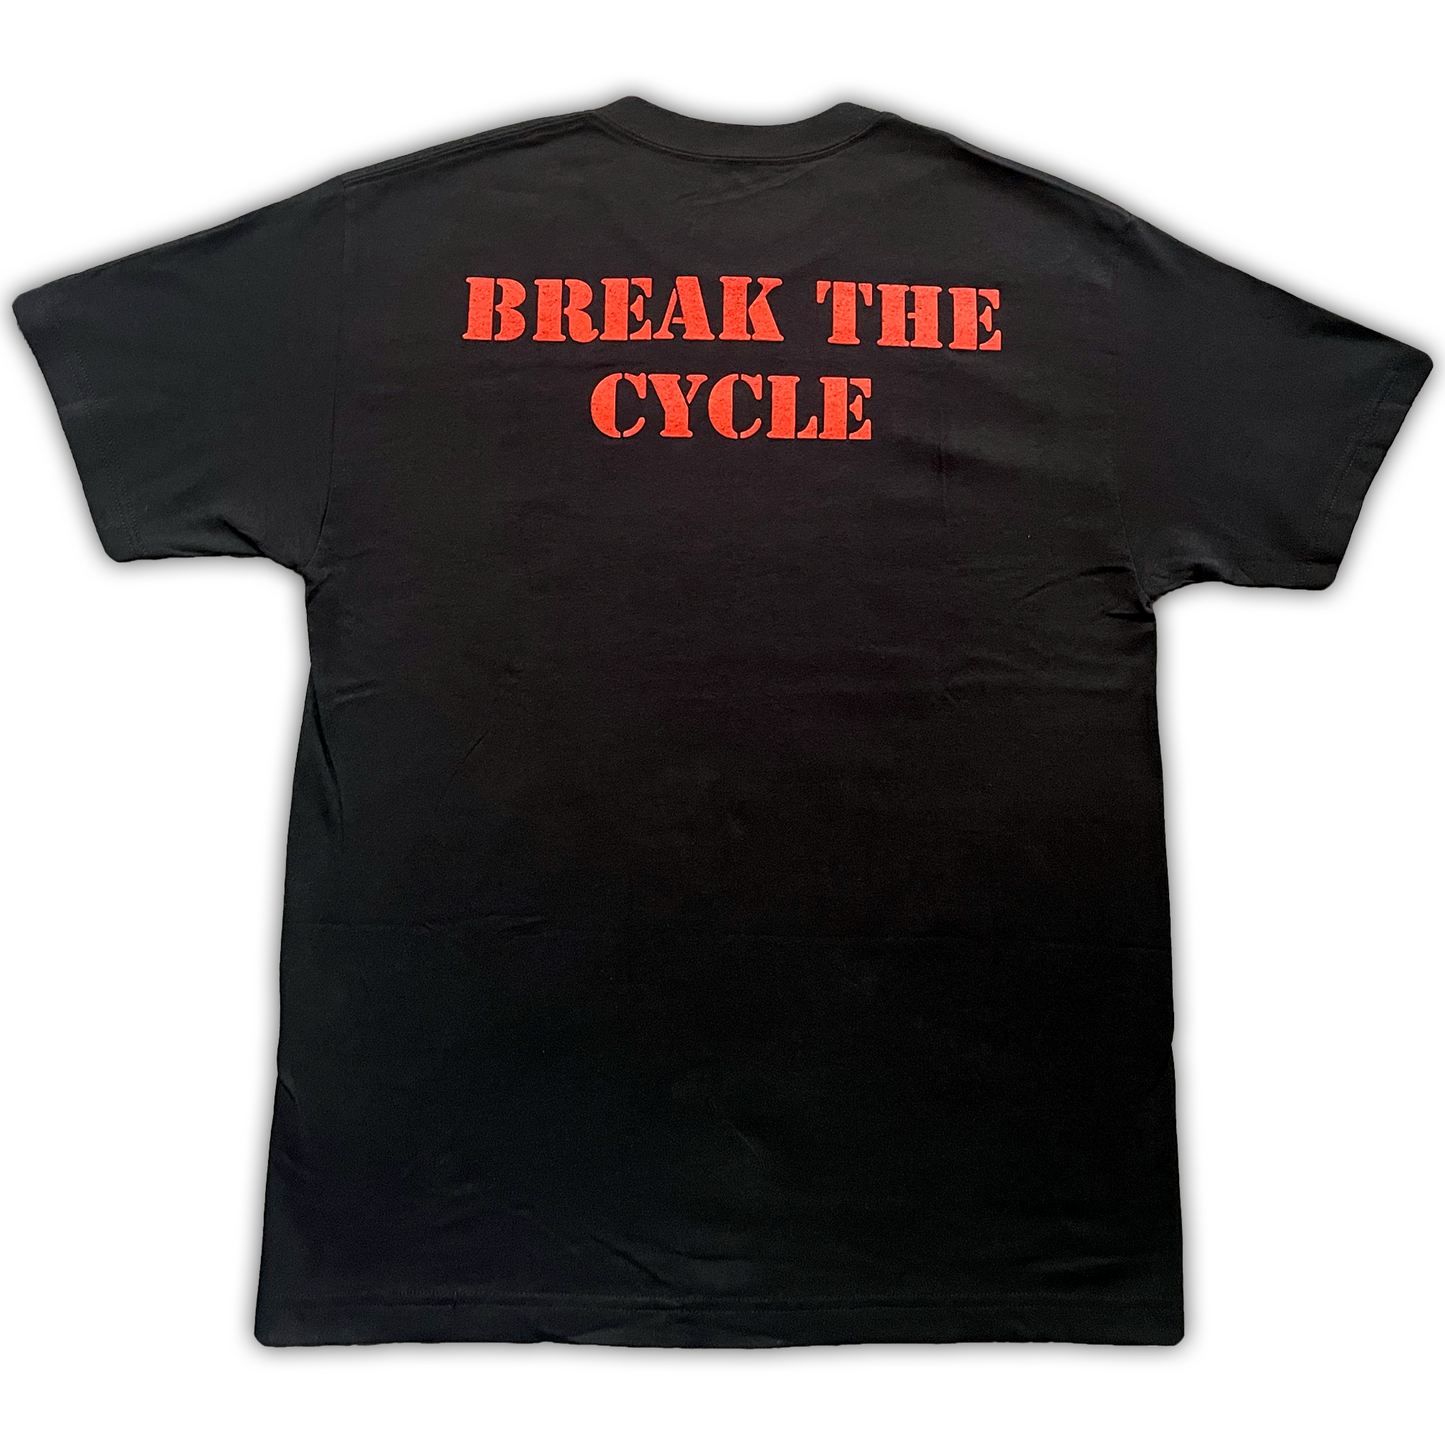 Break The Cycle (Free if you spend $20)